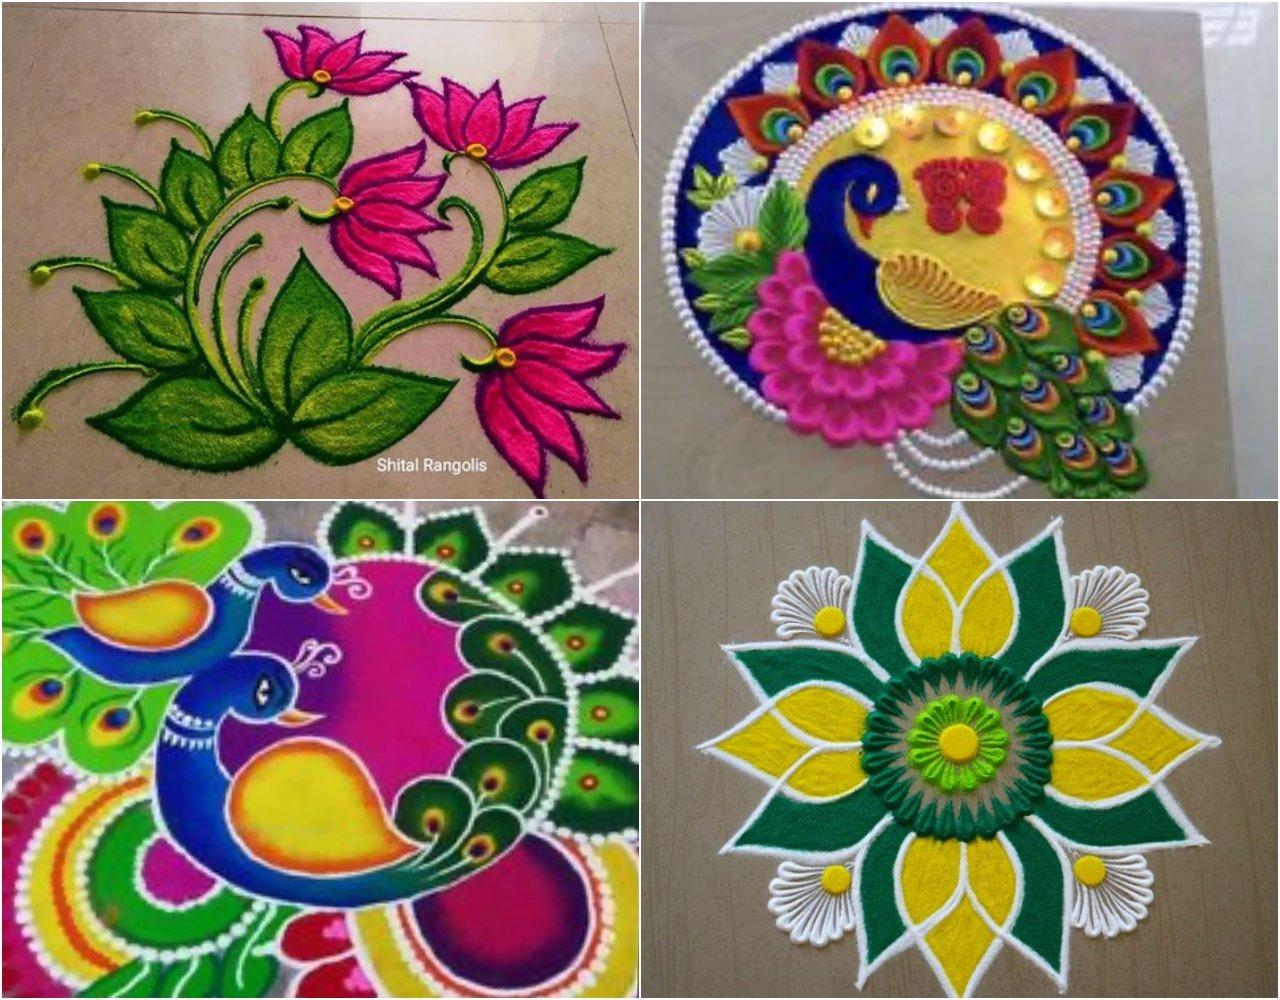 Buy Ascension 12 Different Design Draw Rangoli Making Kit, Rangoli Stamp -  Om, Swastik, Flower, Assorted Multi Colourful Rangoli Designs, Rangoli  Making Stencils,Plastic Online at Low Prices in India - Amazon.in